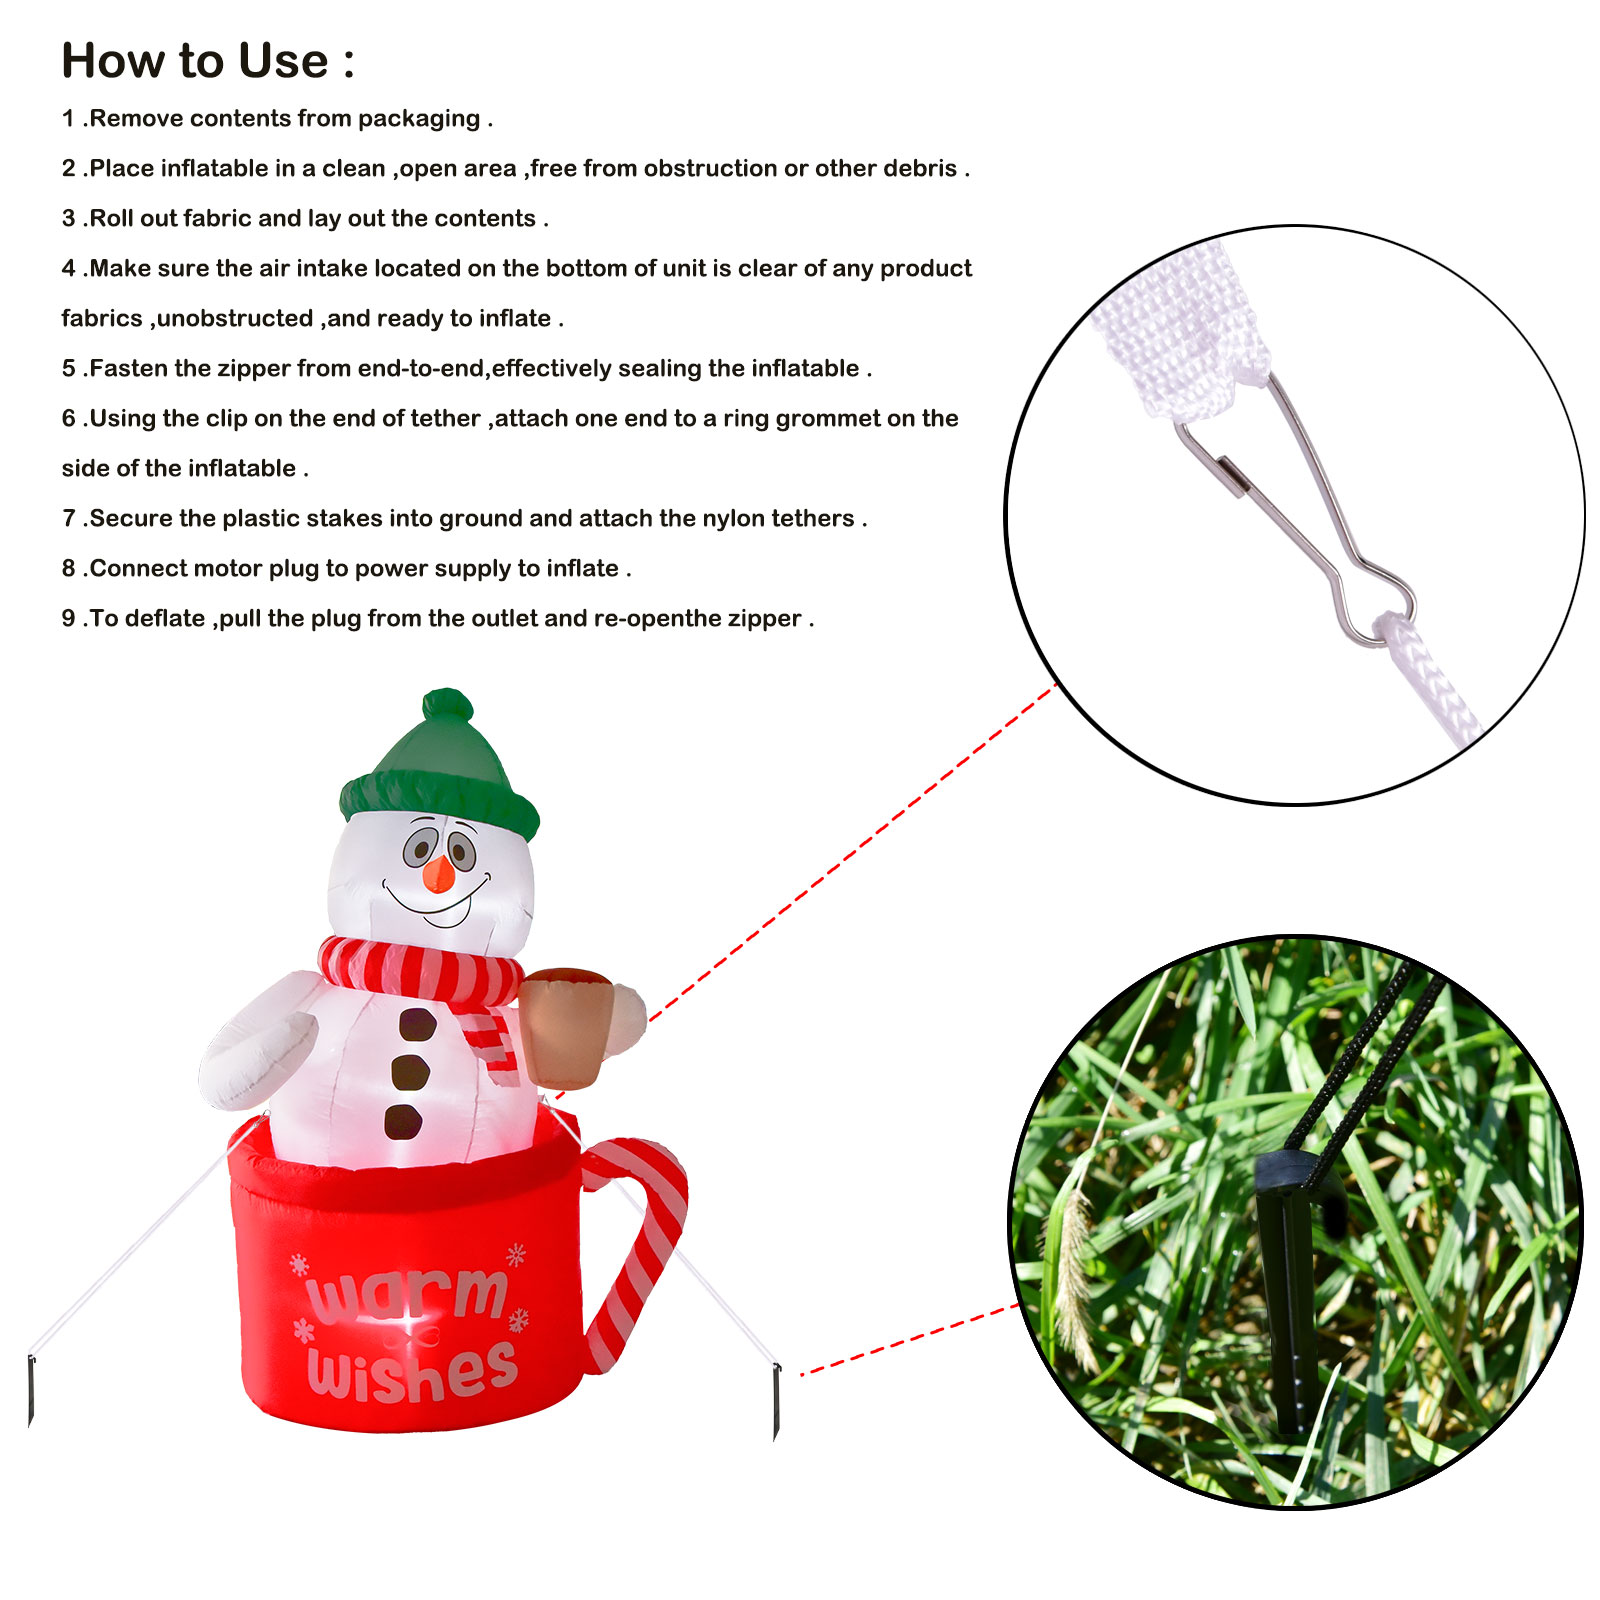 Nifti Nest 4 Ft Long x 6 Ft Tall Christmas Inflatables Snowman in Frosty Mug with Built-in LED Lights, Christmas Blow Up Yard Decorations for Holiday Lawn, Garden, Christmas Decorations - image 4 of 8